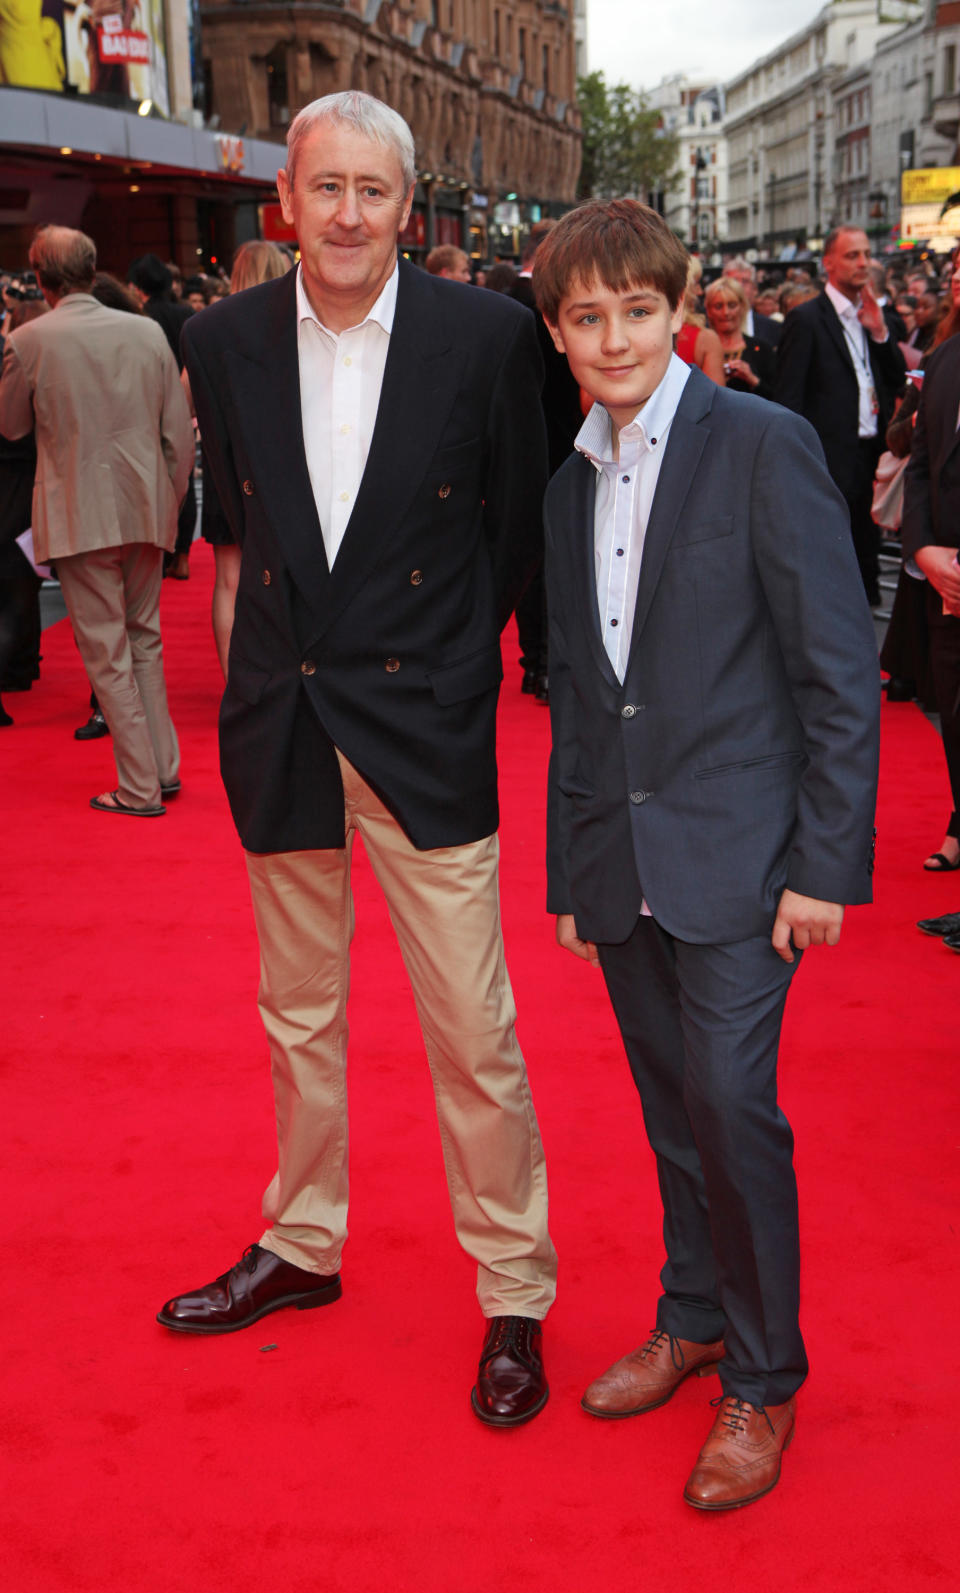 Nicholas Lyndhurst (L) and Archie Bijorn Lyndhurst attend the World Premiere of "The Bad Education Movie" at Vue West End on August 20, 2015 in London, England. (Photo by David M. Benett/Dave Benett/WireImage)